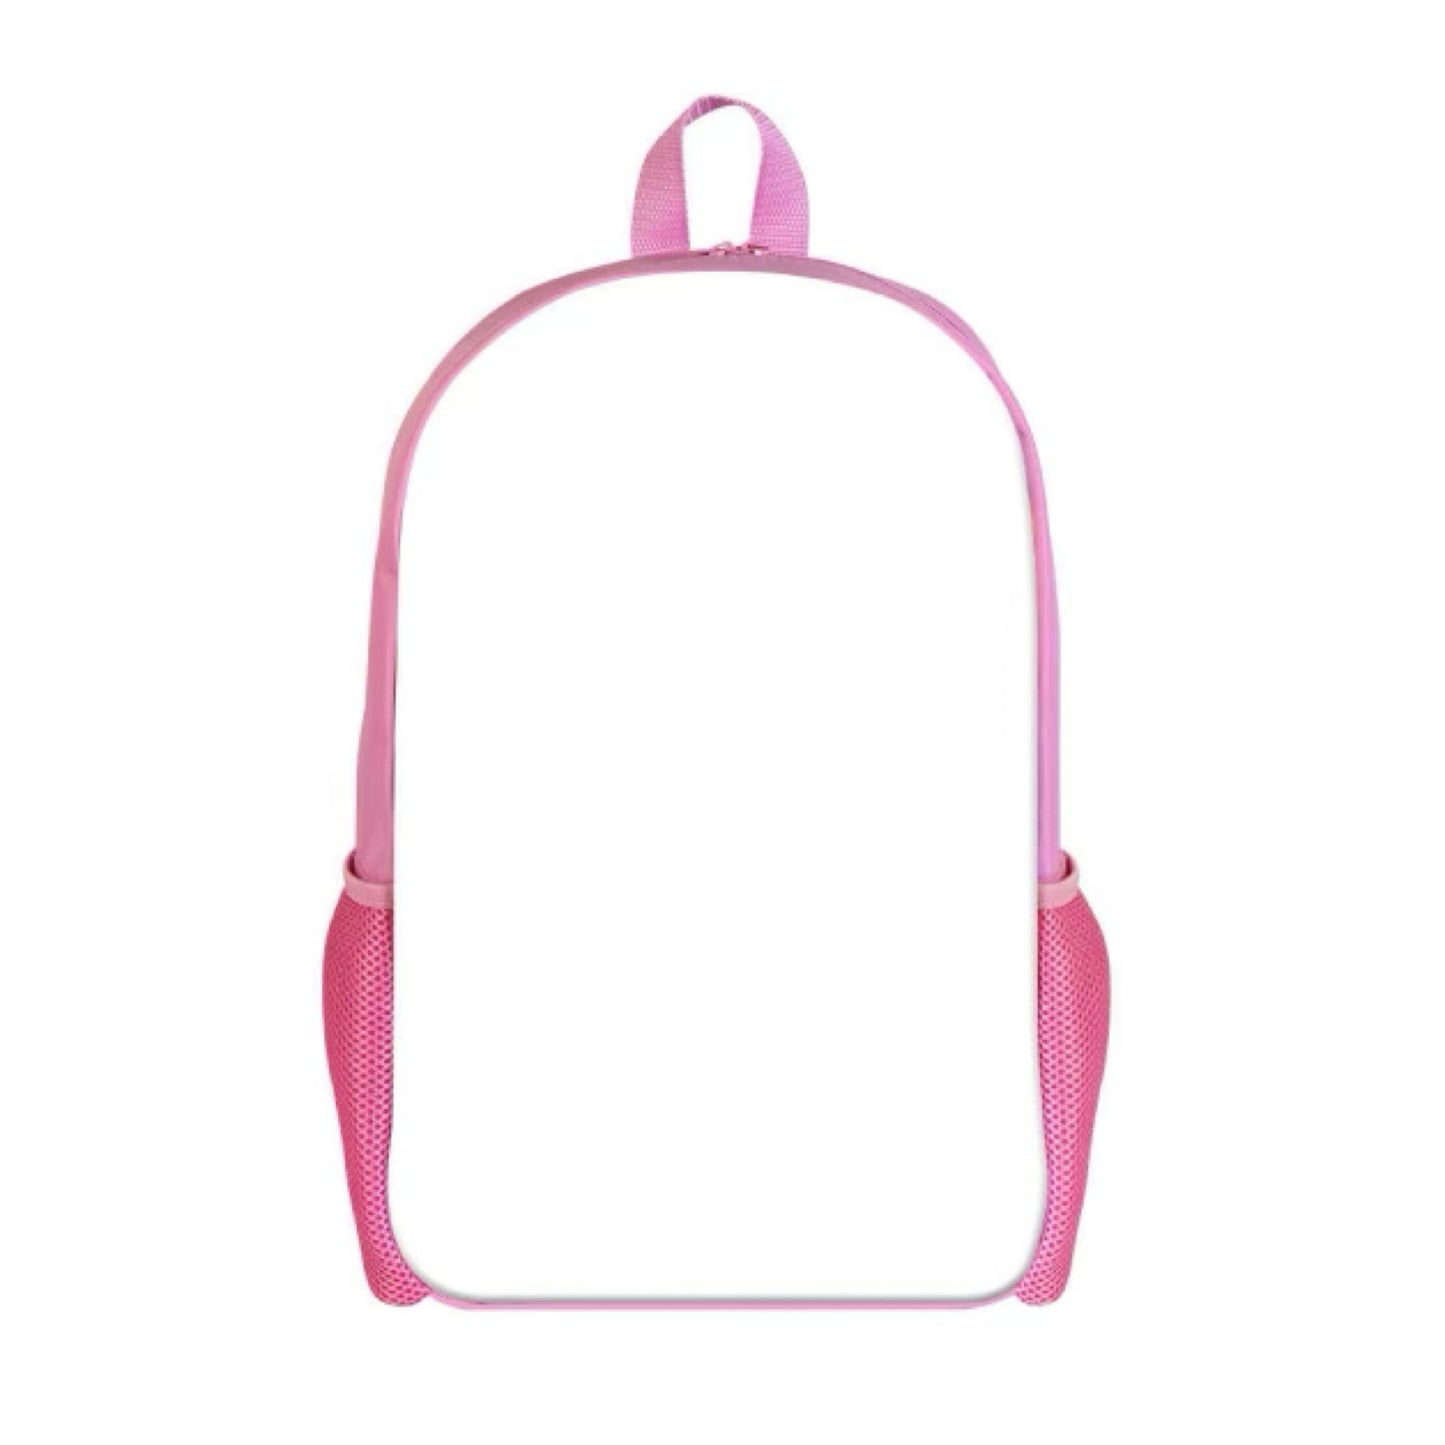 Large Book Bags